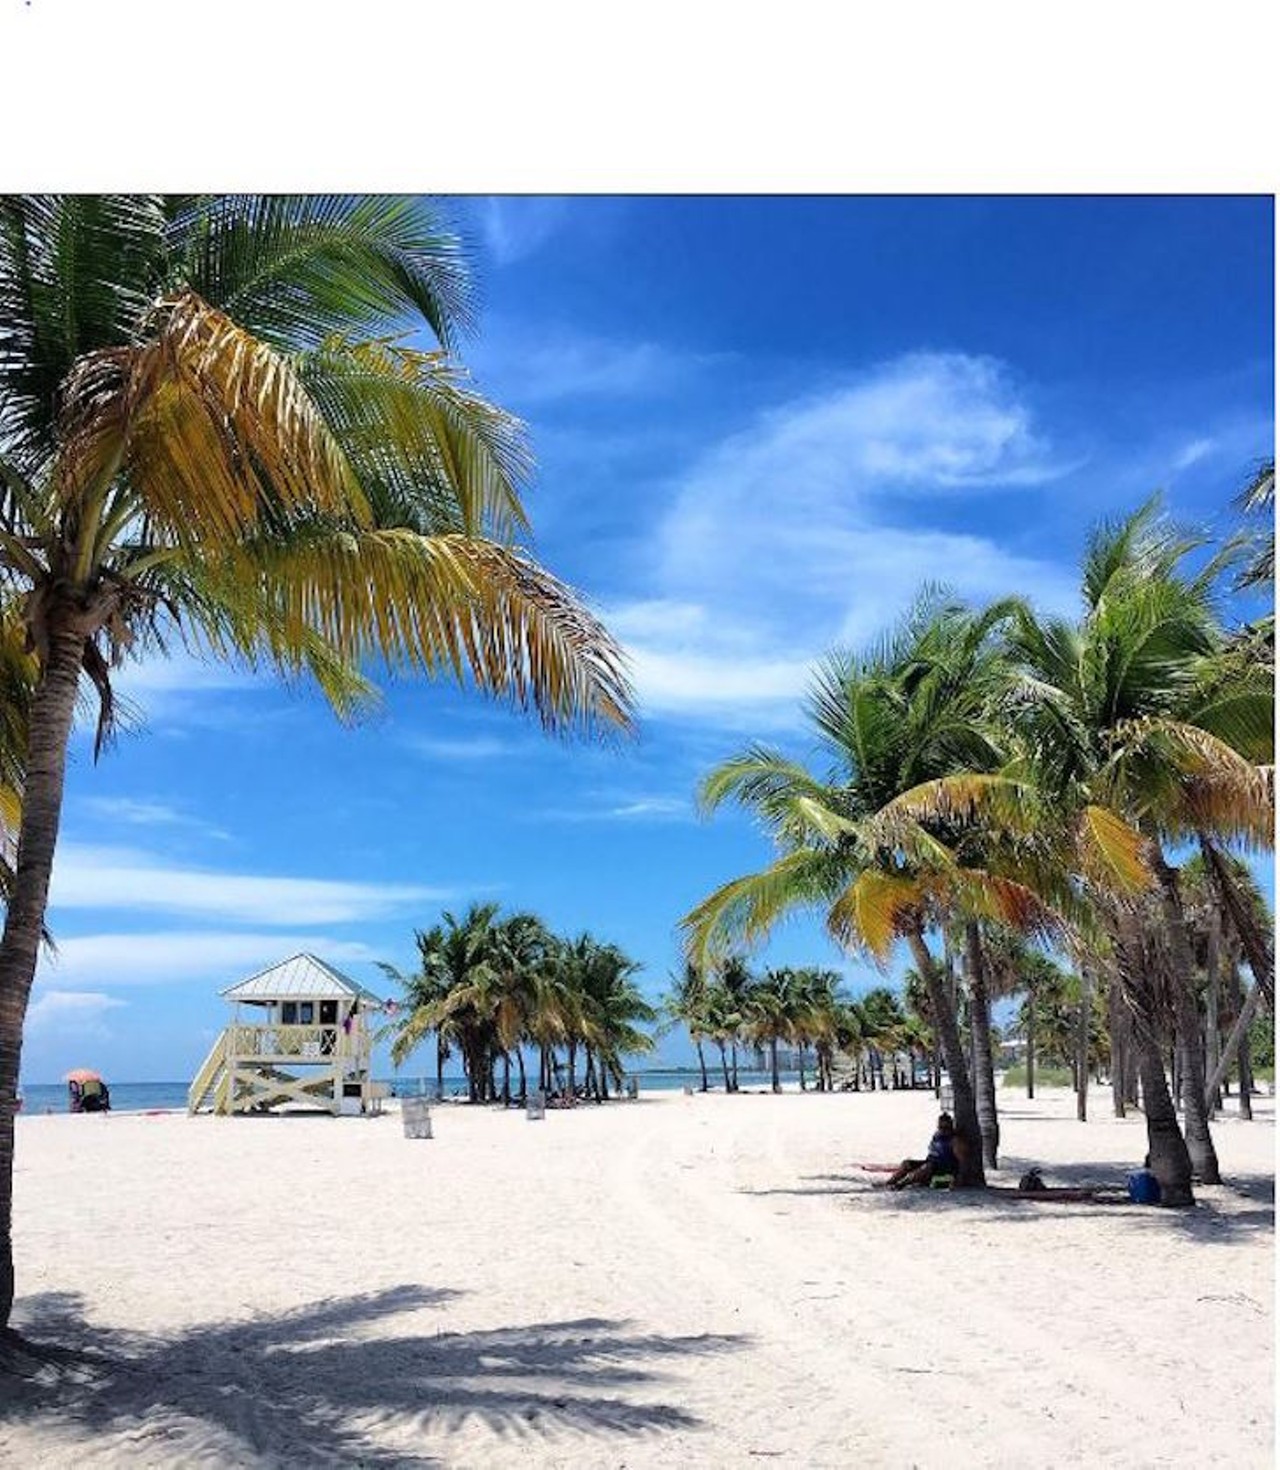 Crandon Park
Driving distance from Orlando: 4 hours 
This is the kind of beach you see in swimwear ads, tropical and picturesque. A large sandbar protects the beach from strong ocean waves making it excellent for families with young children. For the more adventurous rent a kayak or a kite board and cruise the shoreline.
Photo via viajandonomapa/Instagram